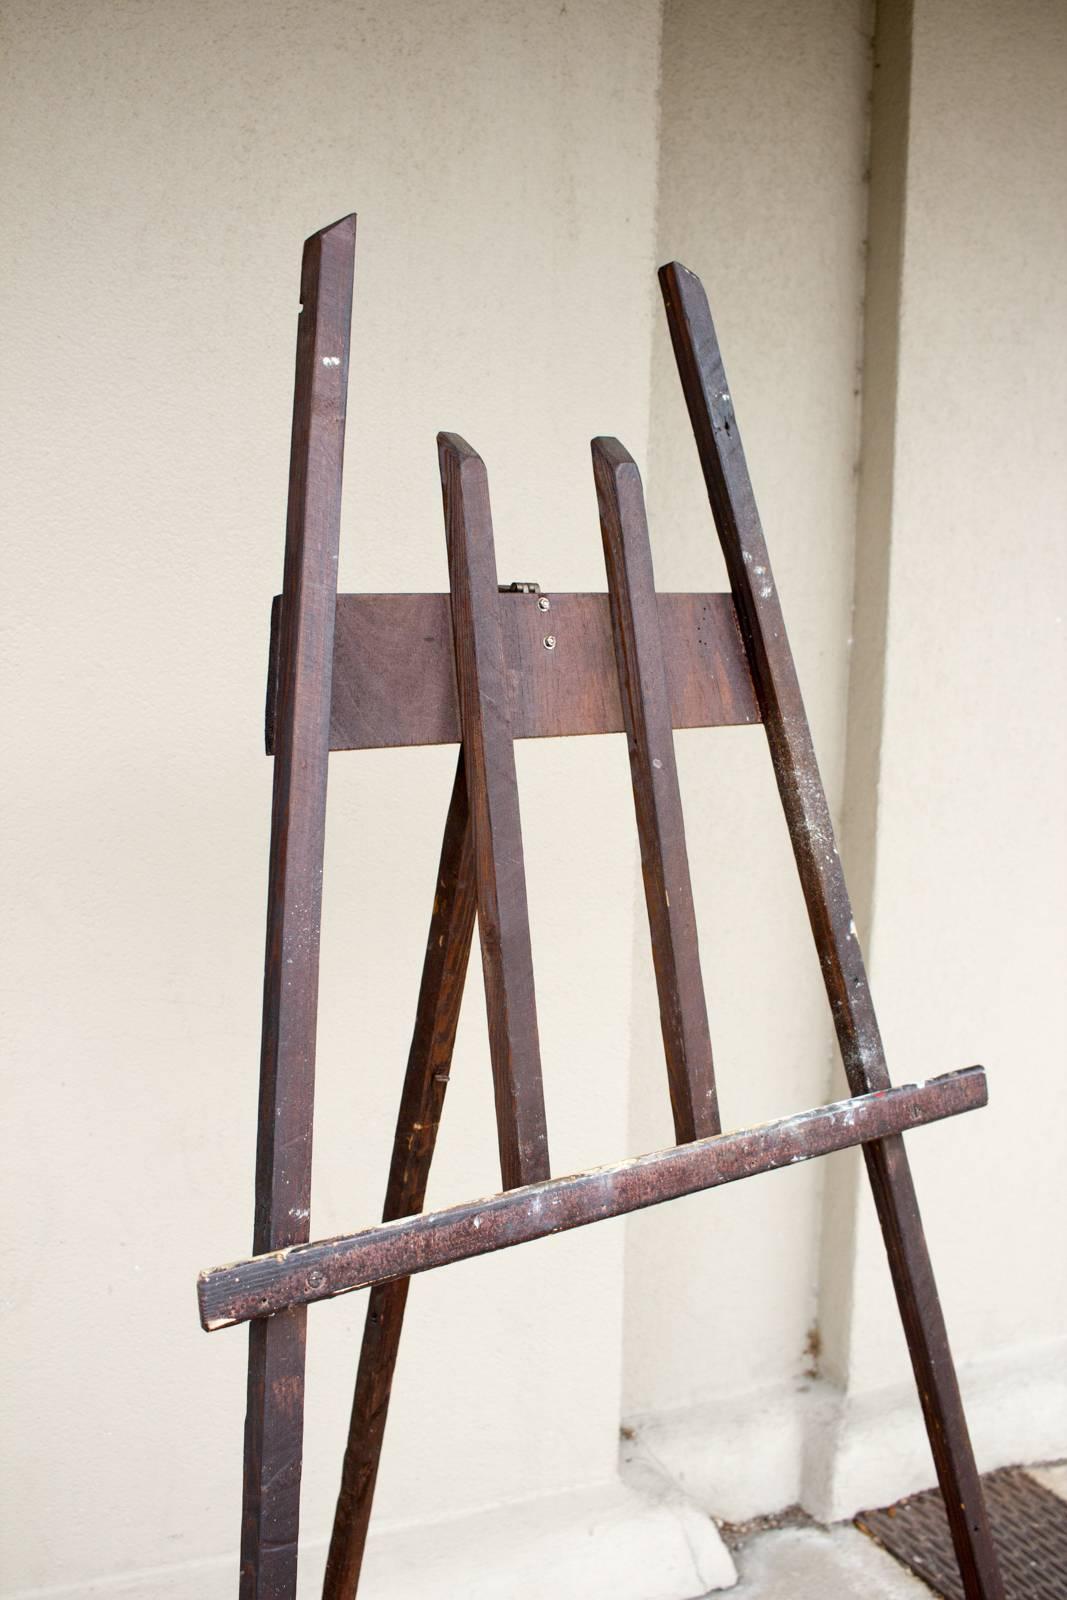 This is a very simple, wood artist's easel uncovered in France. Overall dimensions are 56